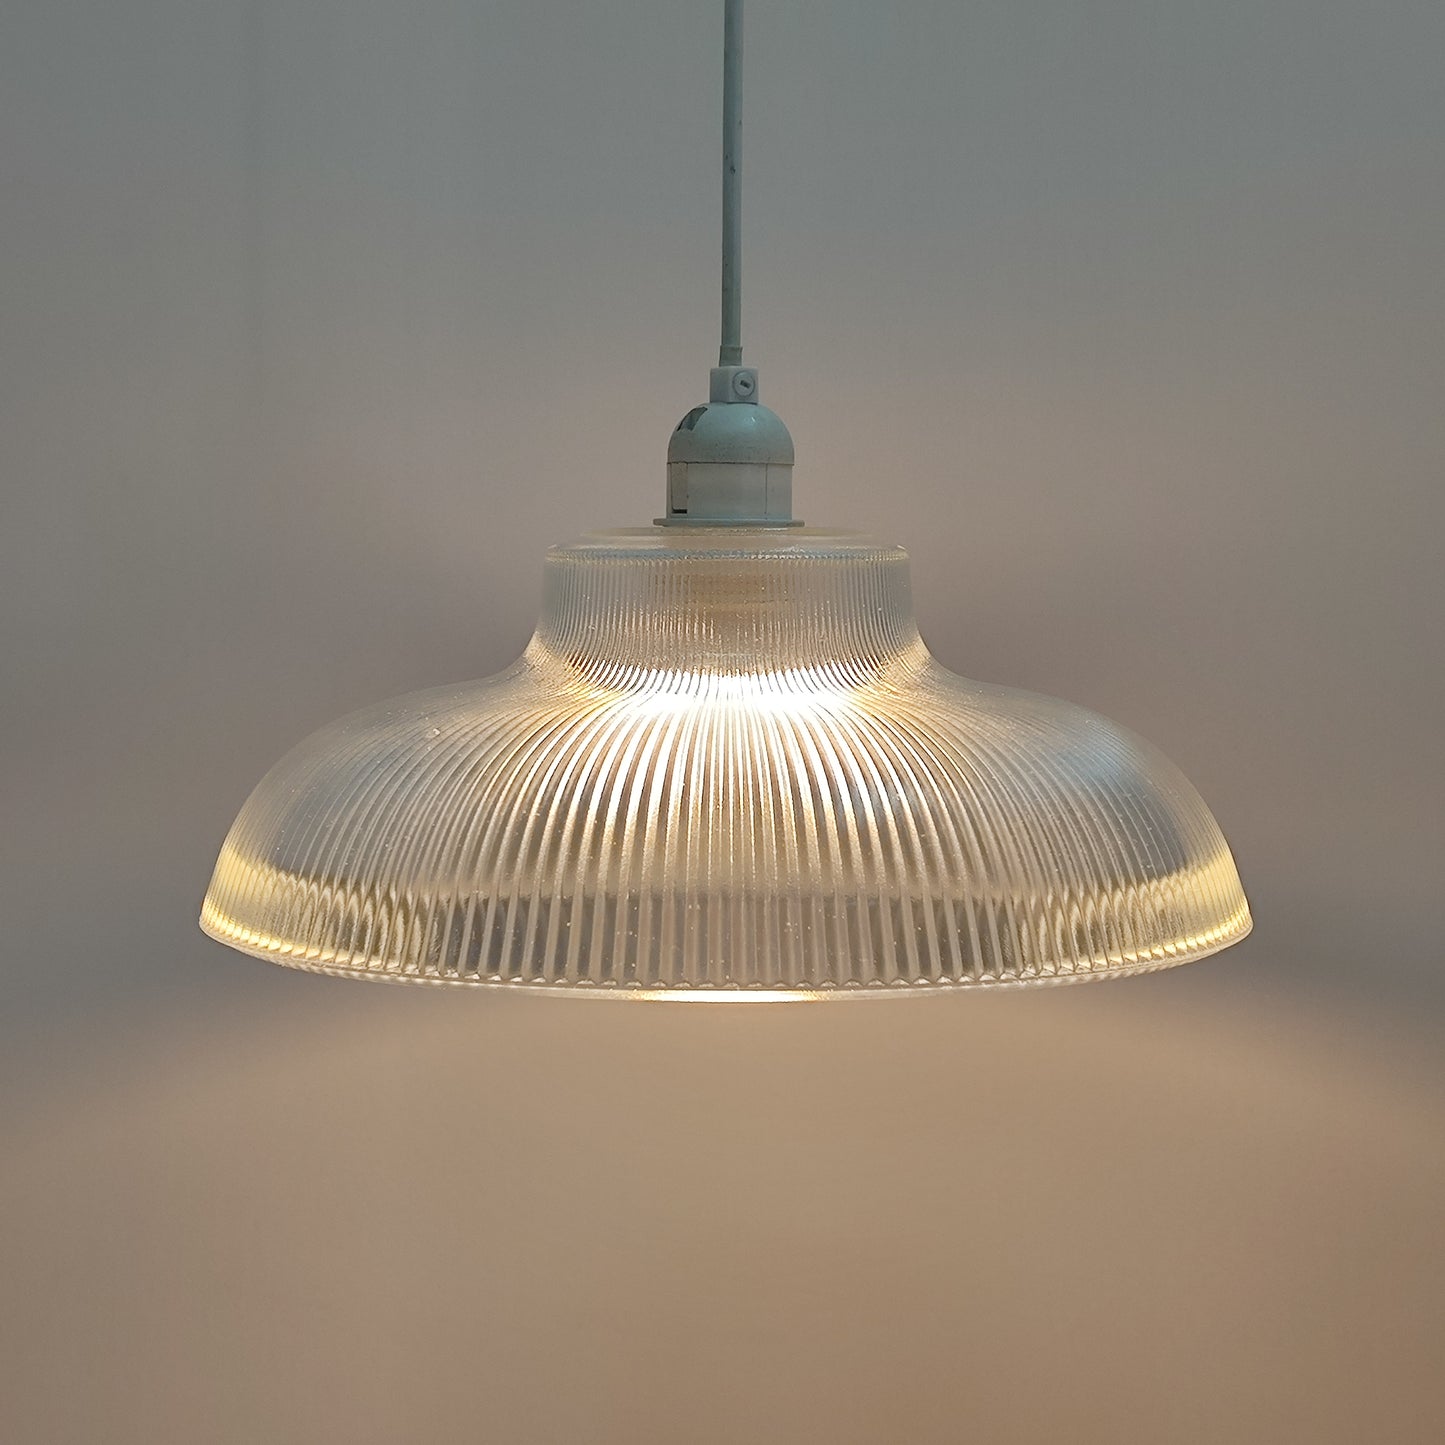 Glass lighting has proven very popular in the lighting sector, and we are extremely happy to introduce the Jacinta to our range. Our ribbed glass easy fit light pendant is a very attractive light fitting and easy fit means you can give your room a makeover by simply attaching it to an existing light fitting. 